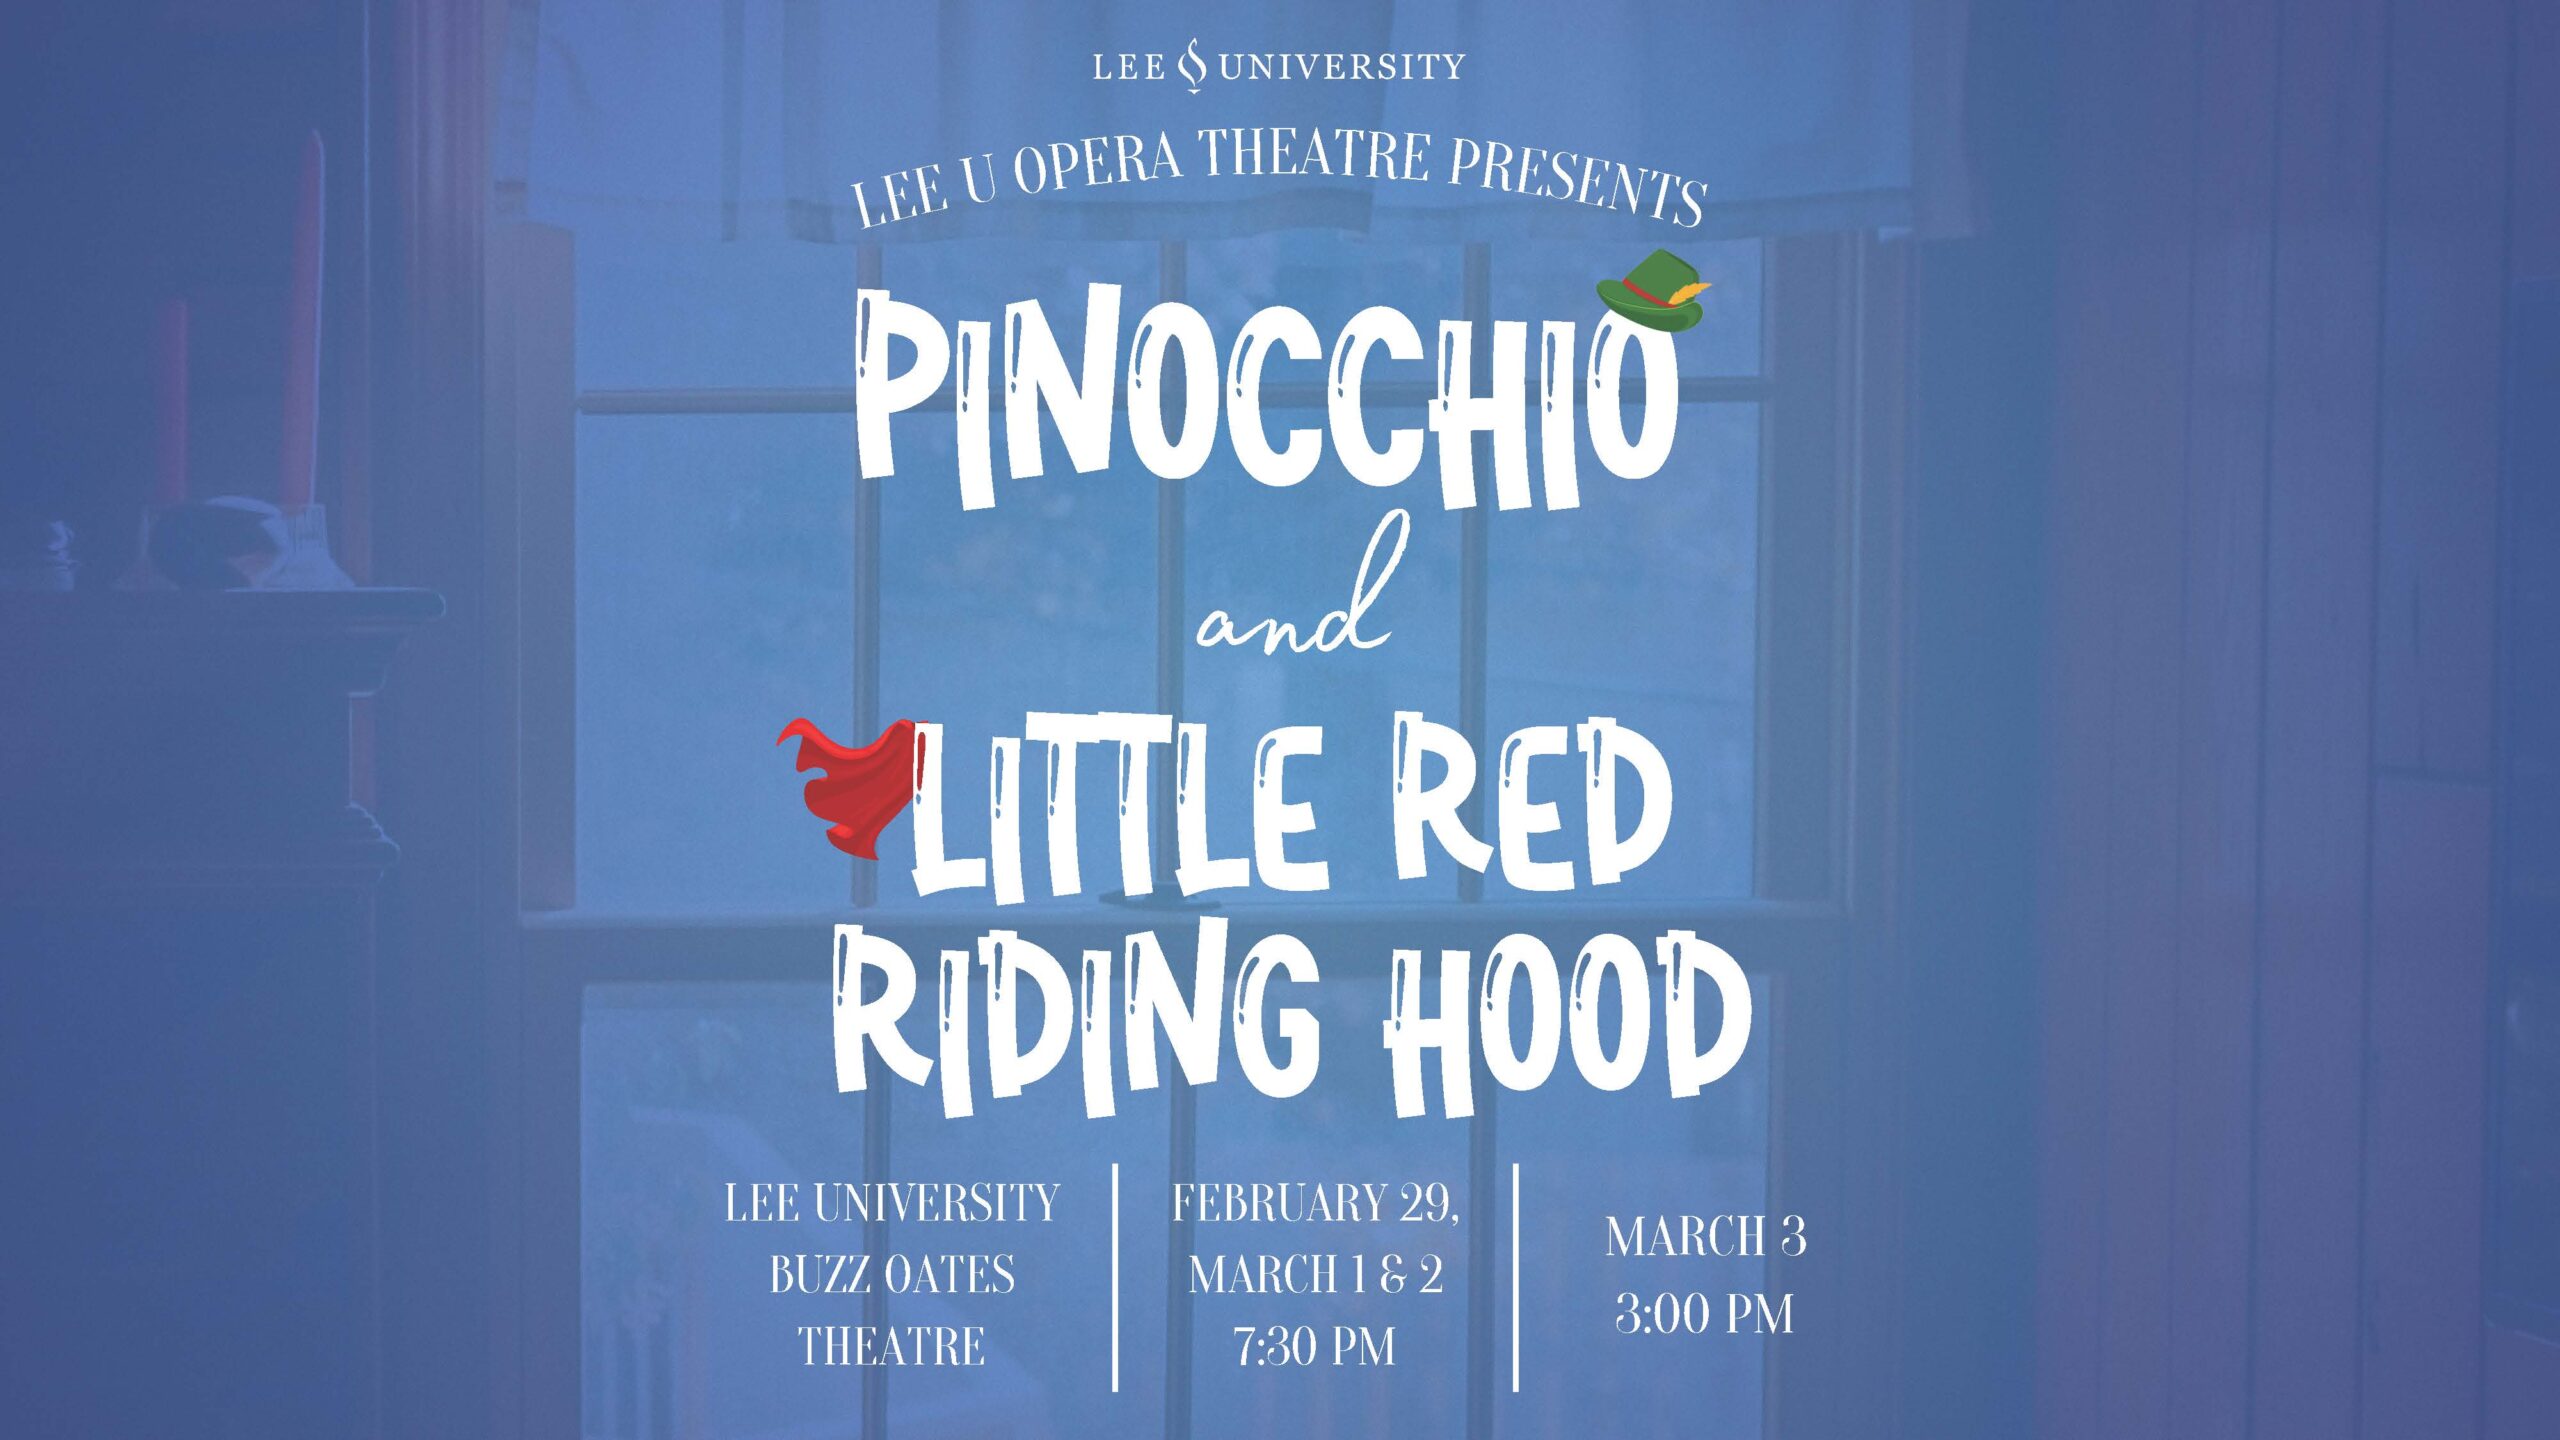 Pinocchio and Little Red Riding Hood